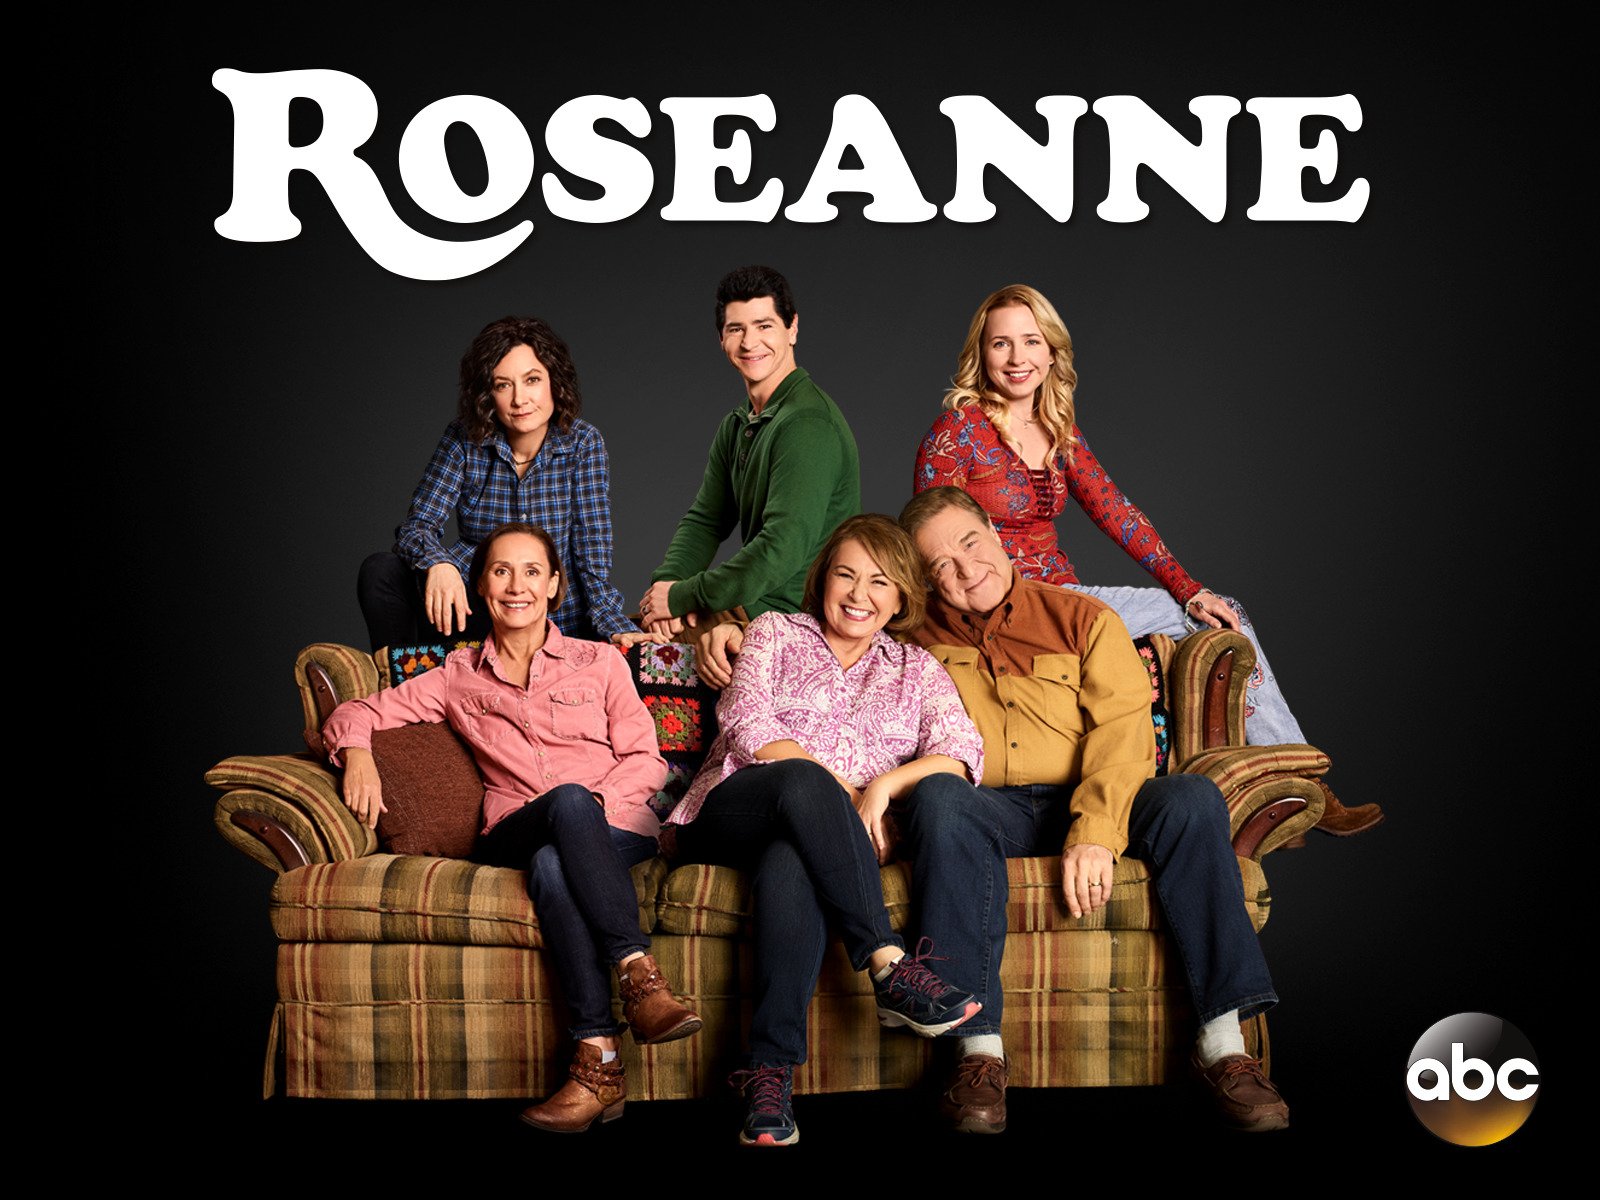 How To Watch Roseanne For Free